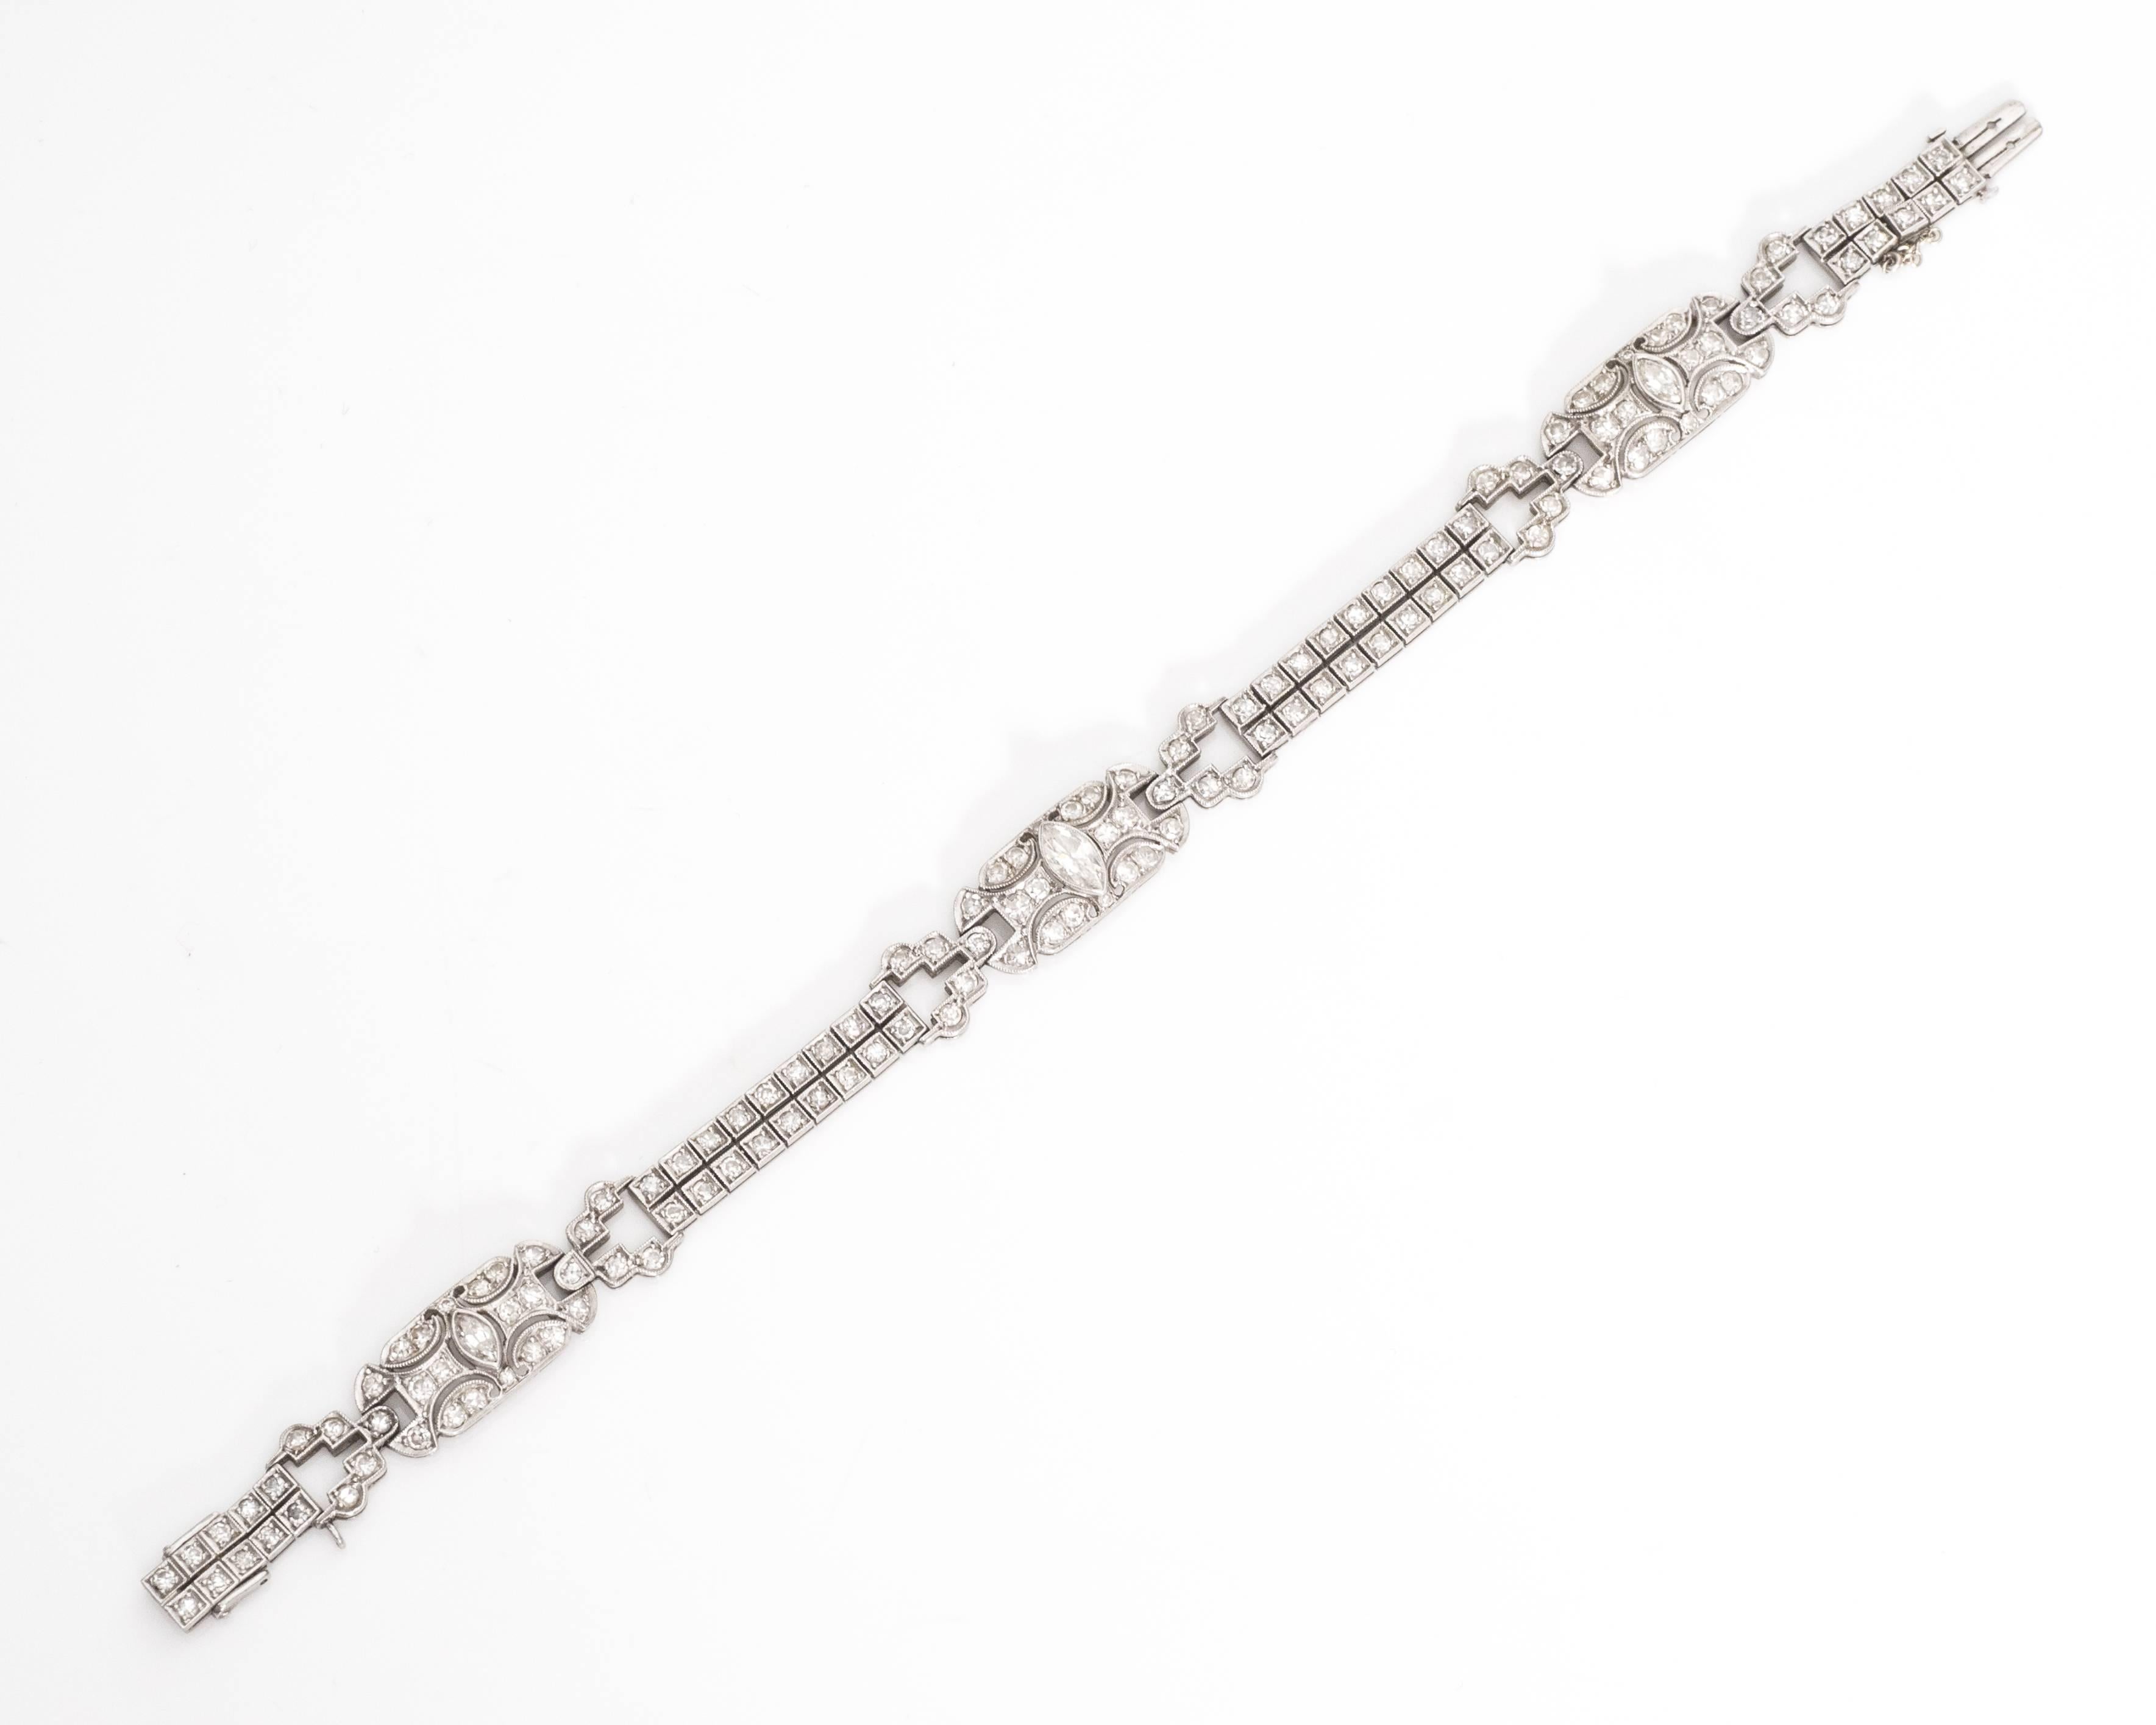 Antique 1905 Art Nouveau 3.5 Carat Diamond Platinum Bracelet features 3.5 carat total weight of marquise and single cut diamonds. 
The diamonds are inlayed between milgrain frames. The handcrafted frames have a symmetrical style with three larger